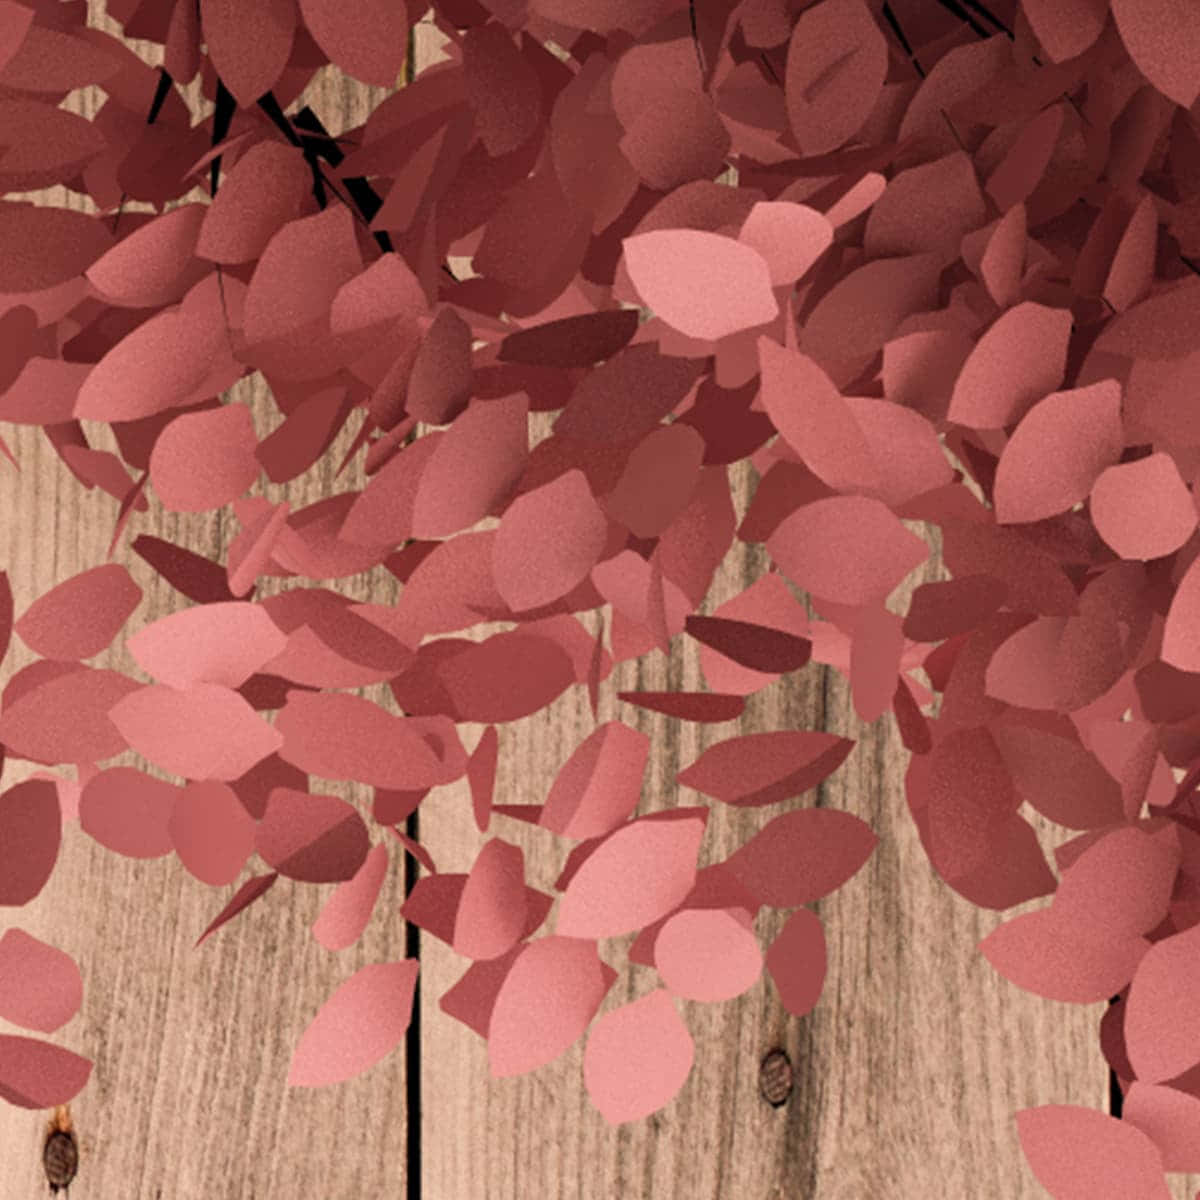 Pink Leaves Wooden Background Wallpaper